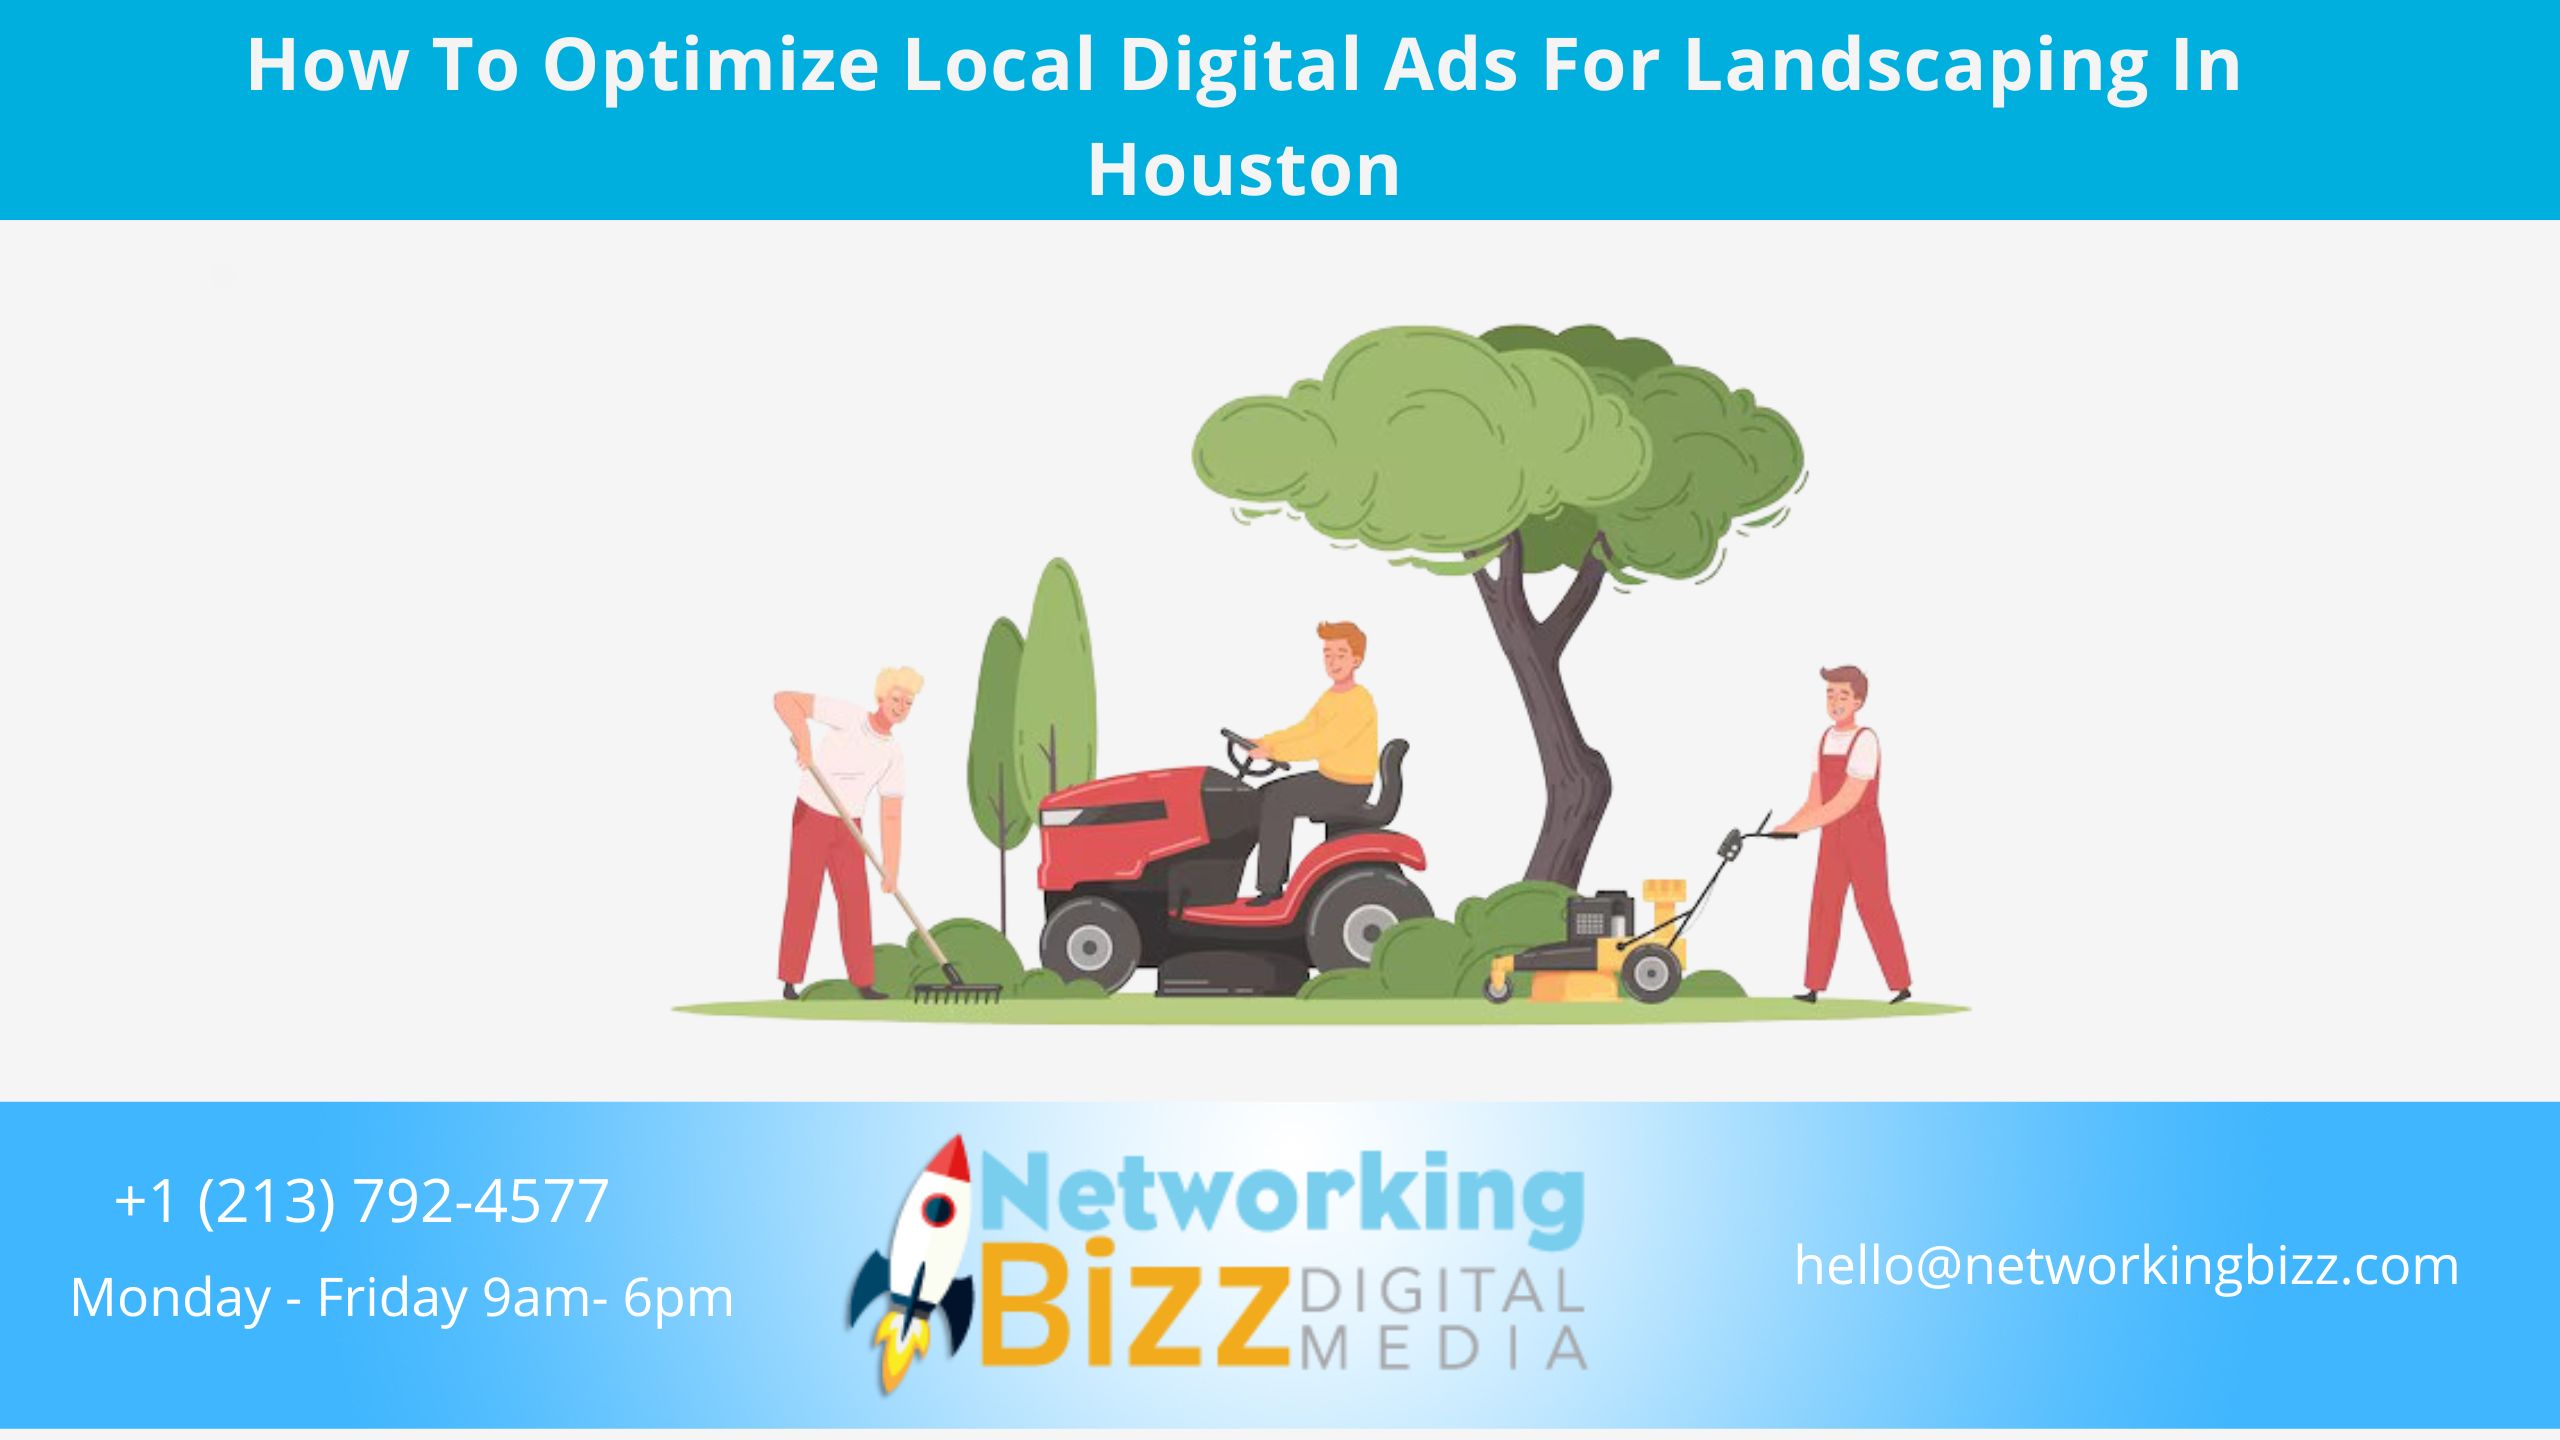 How To Optimize Local Digital Ads For Landscaping In Houston